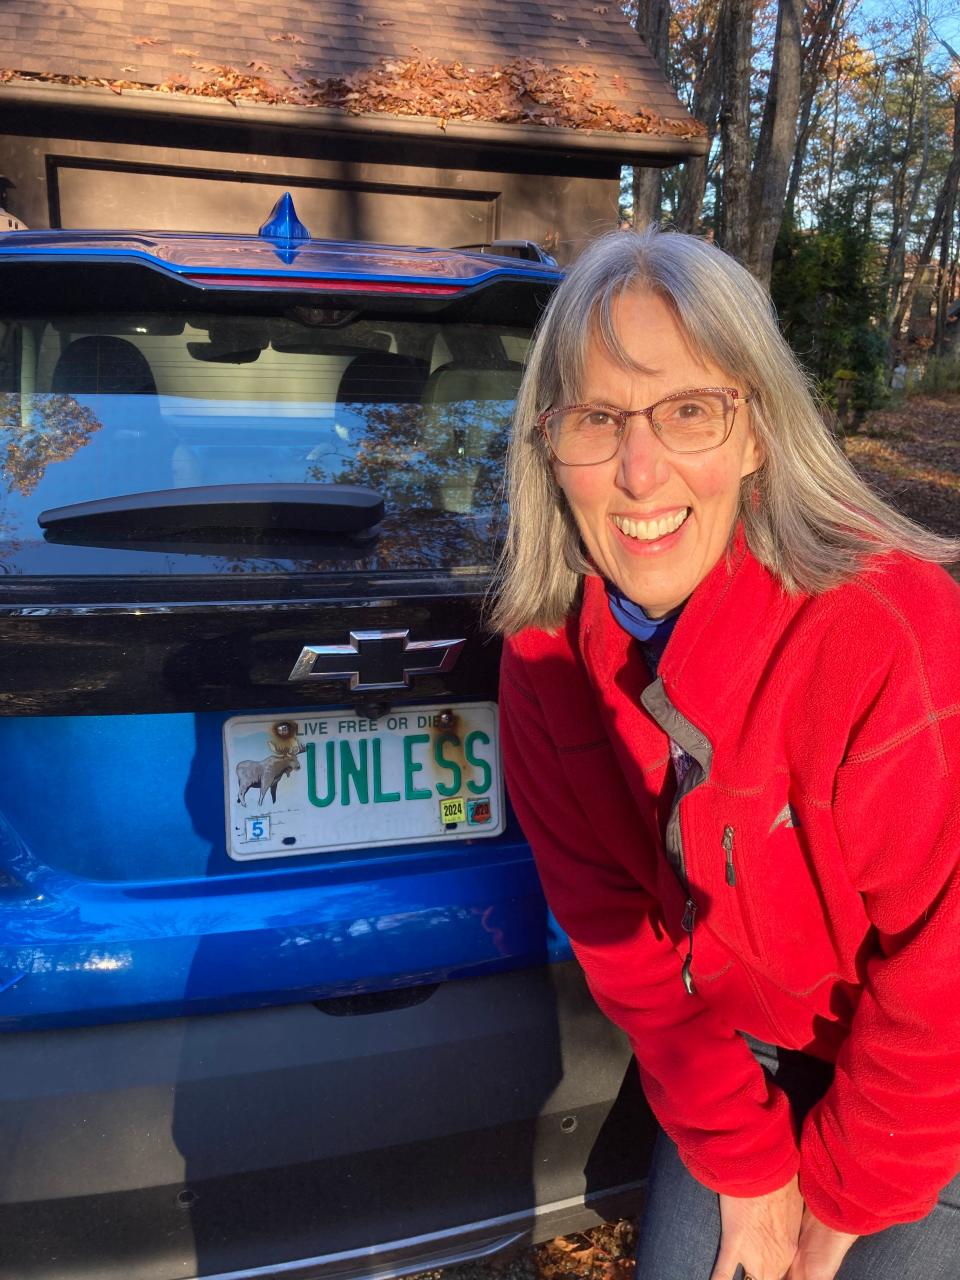 Ruth Smith's number plate has an important Earth Day message.